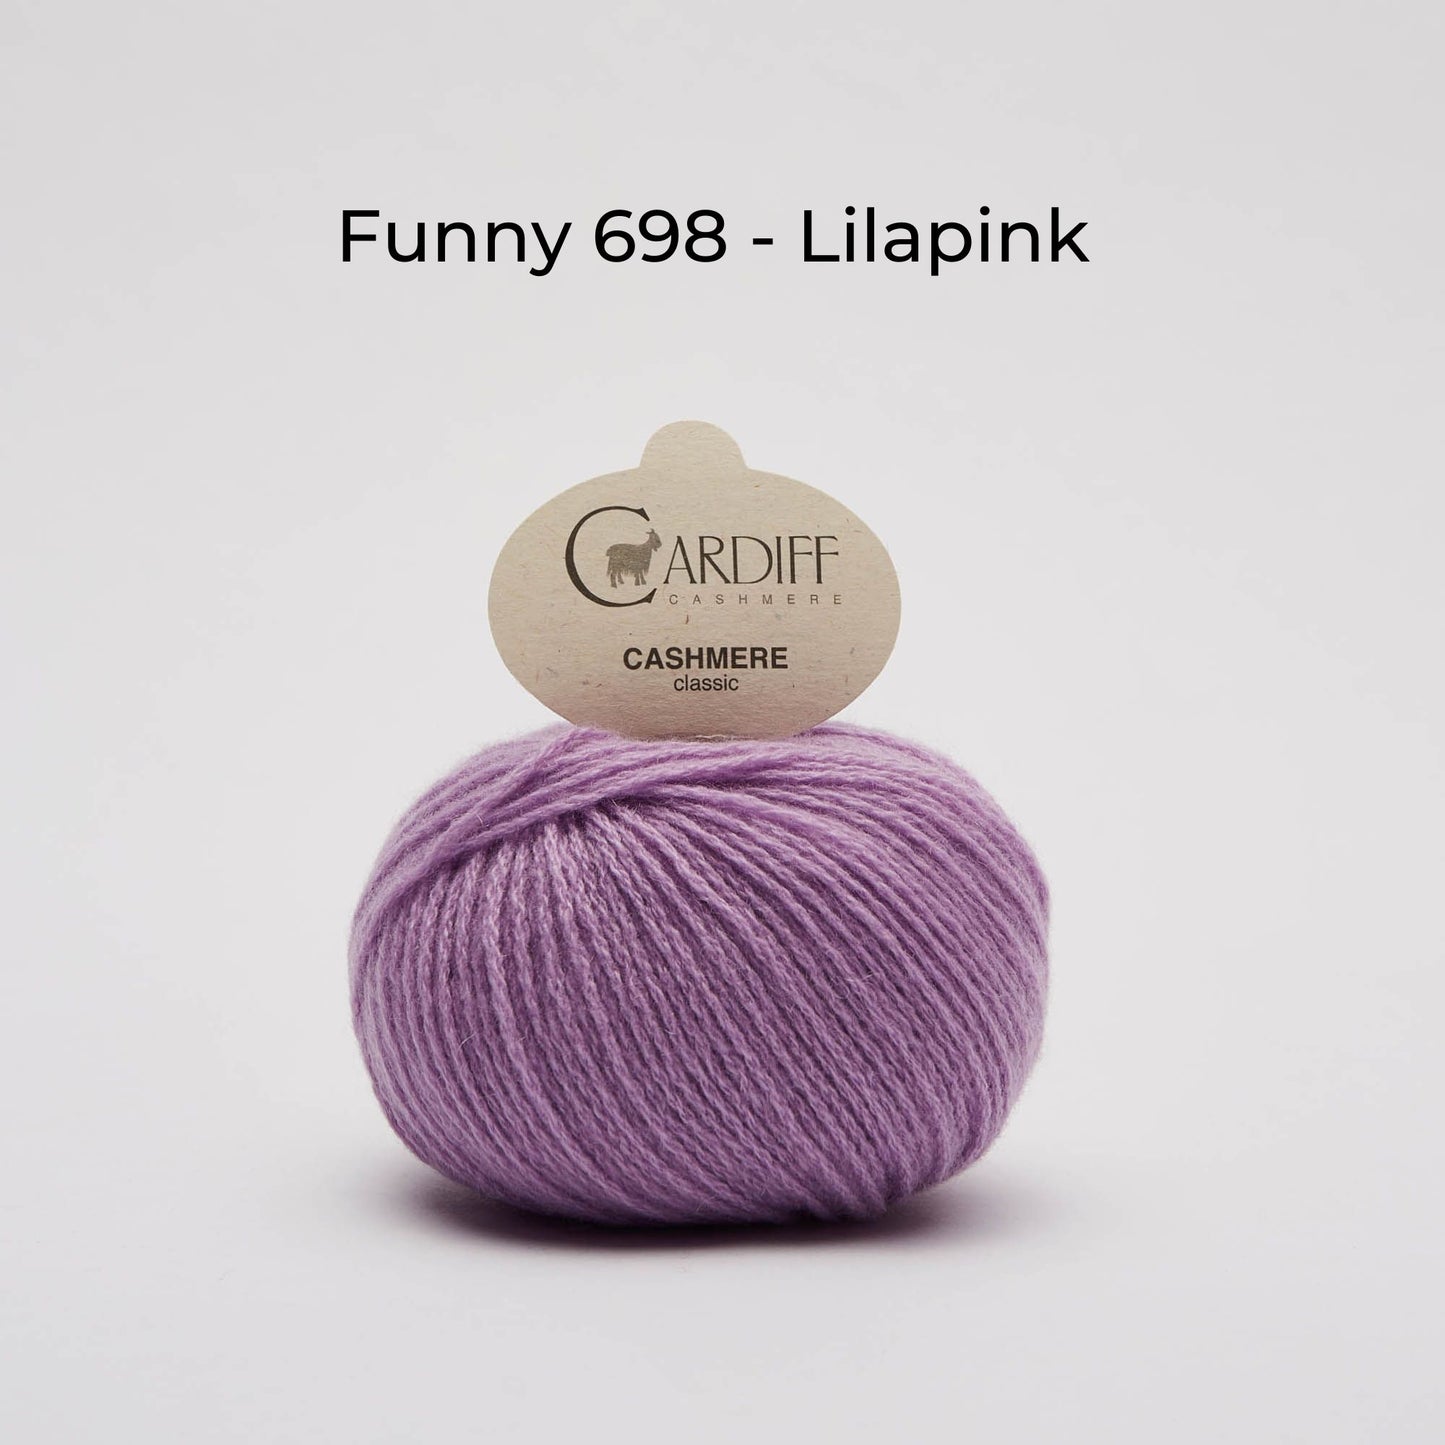 Wollknäuel, Cardiff Cashmere Classic, Farbe Lilapink, Funny 698